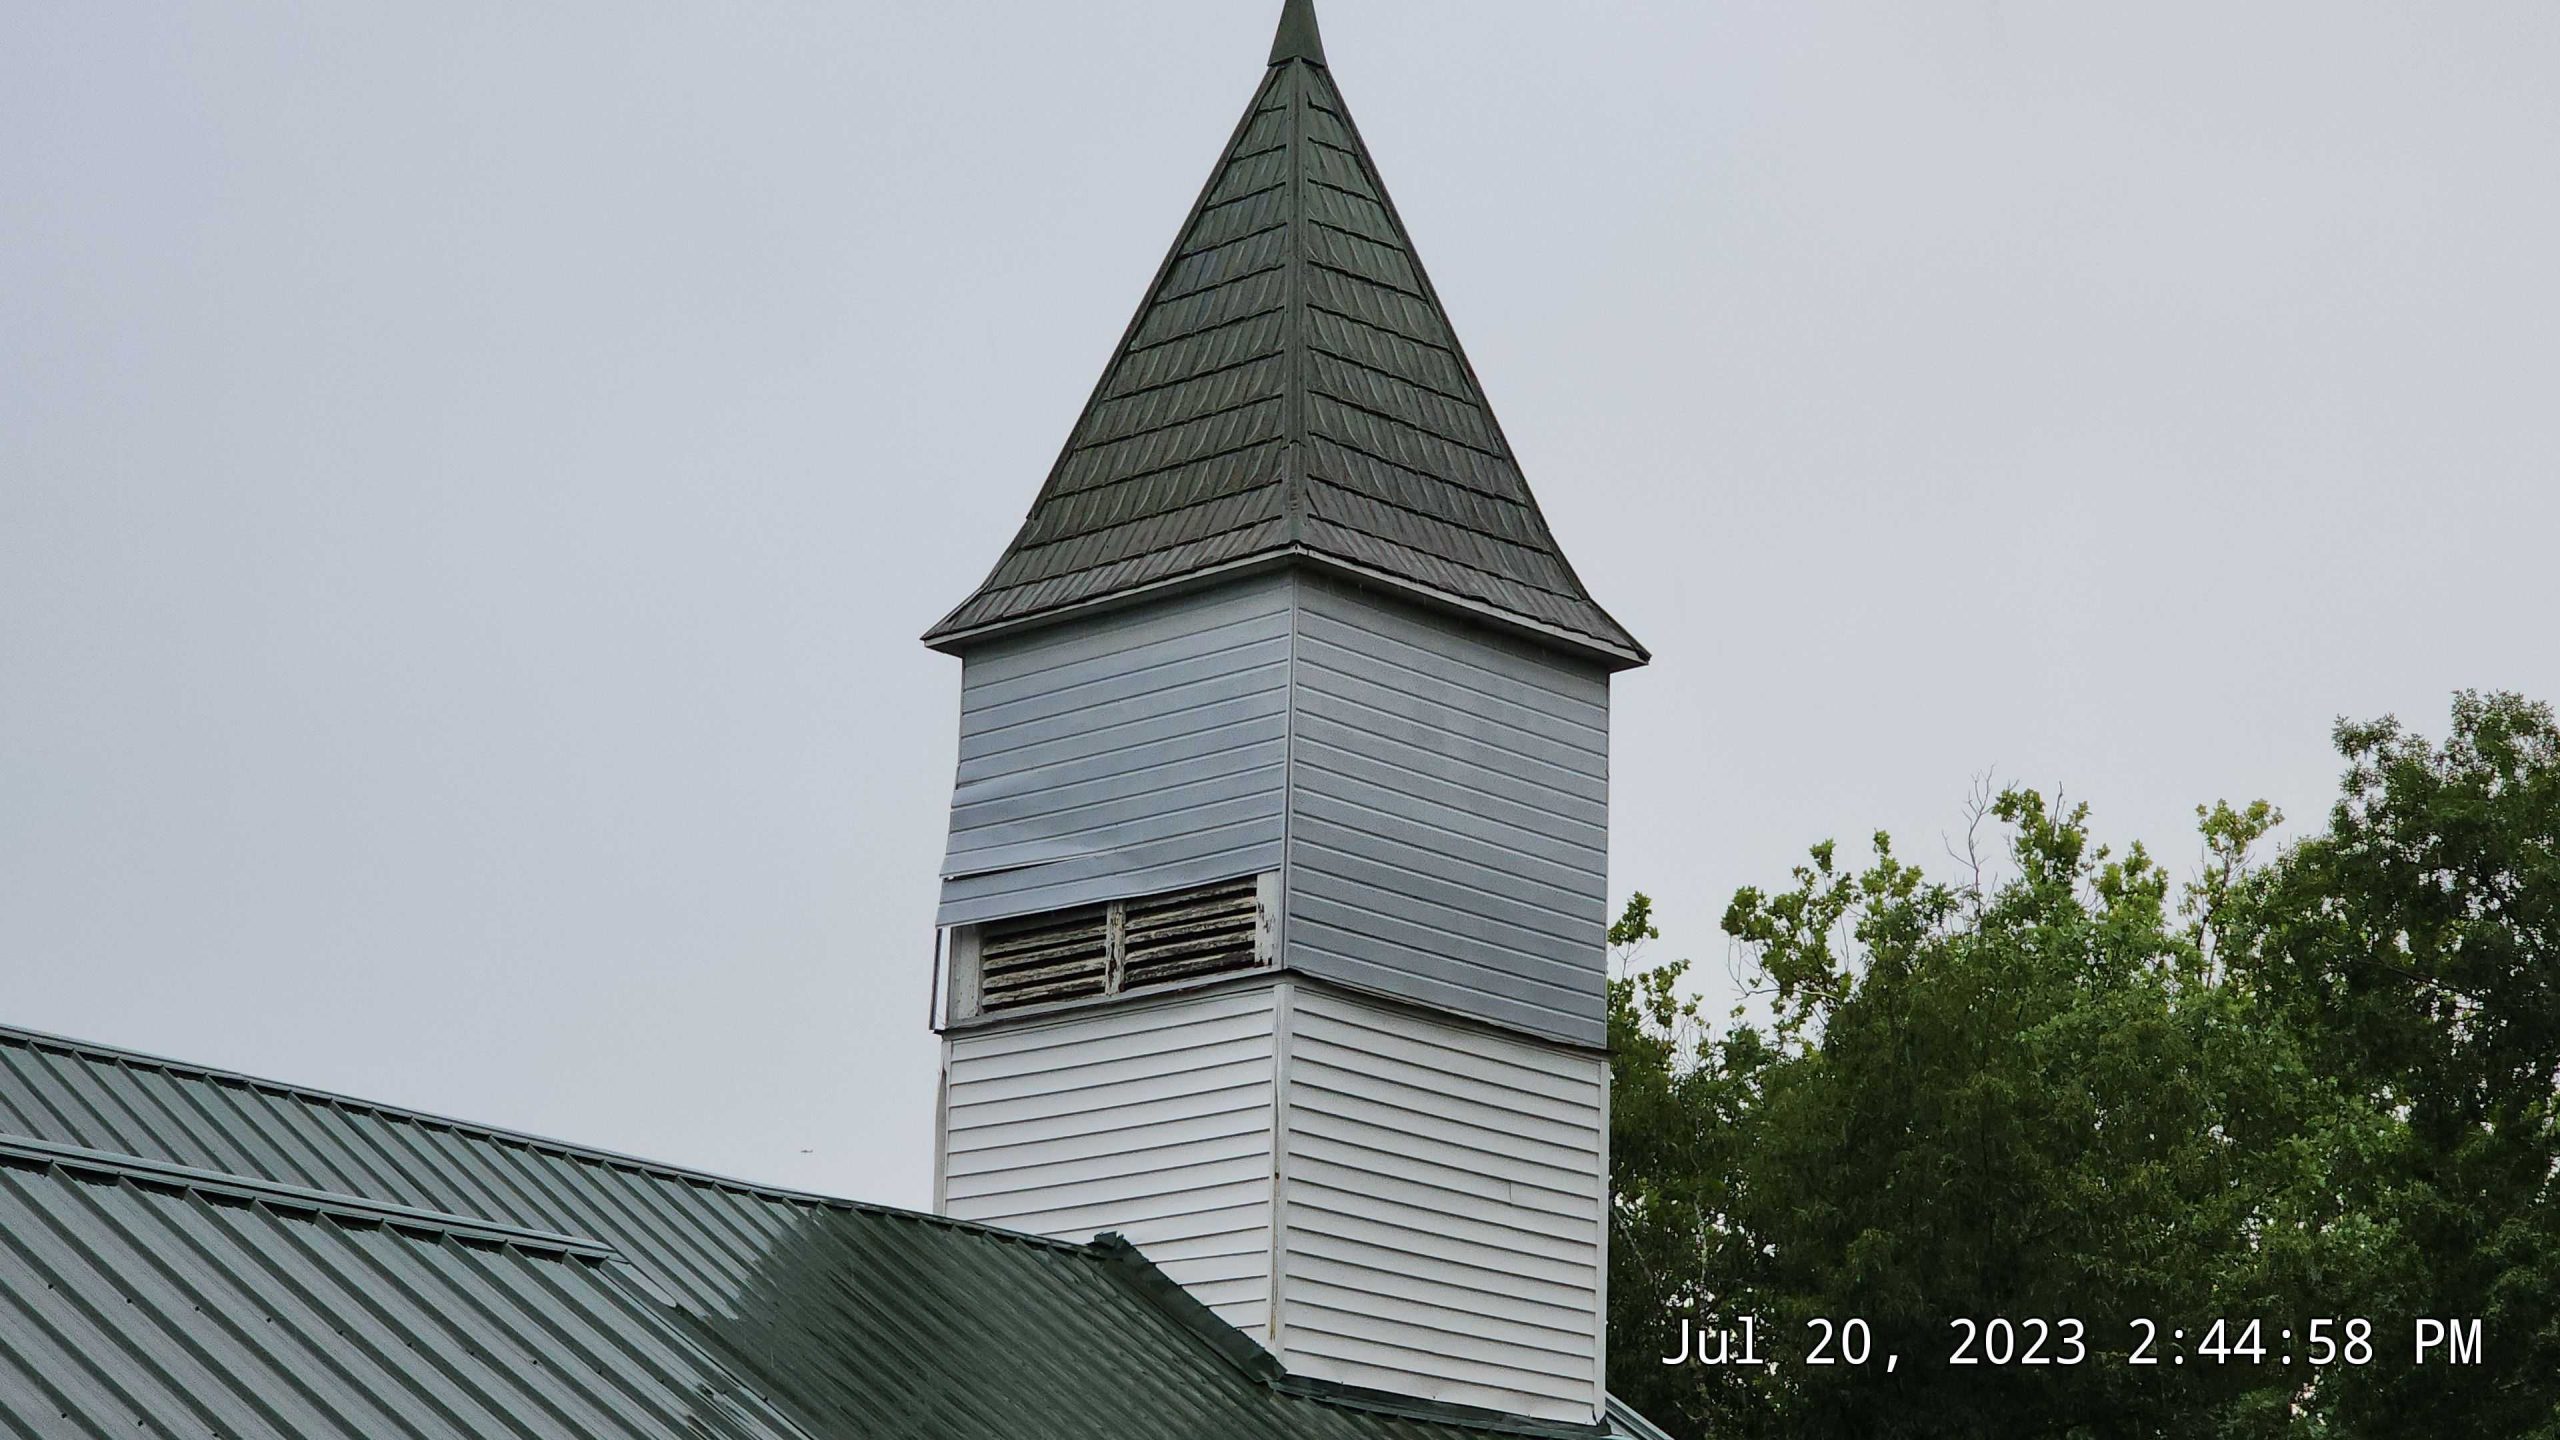 Wind damage, detached metal, and exposed boards on steeple